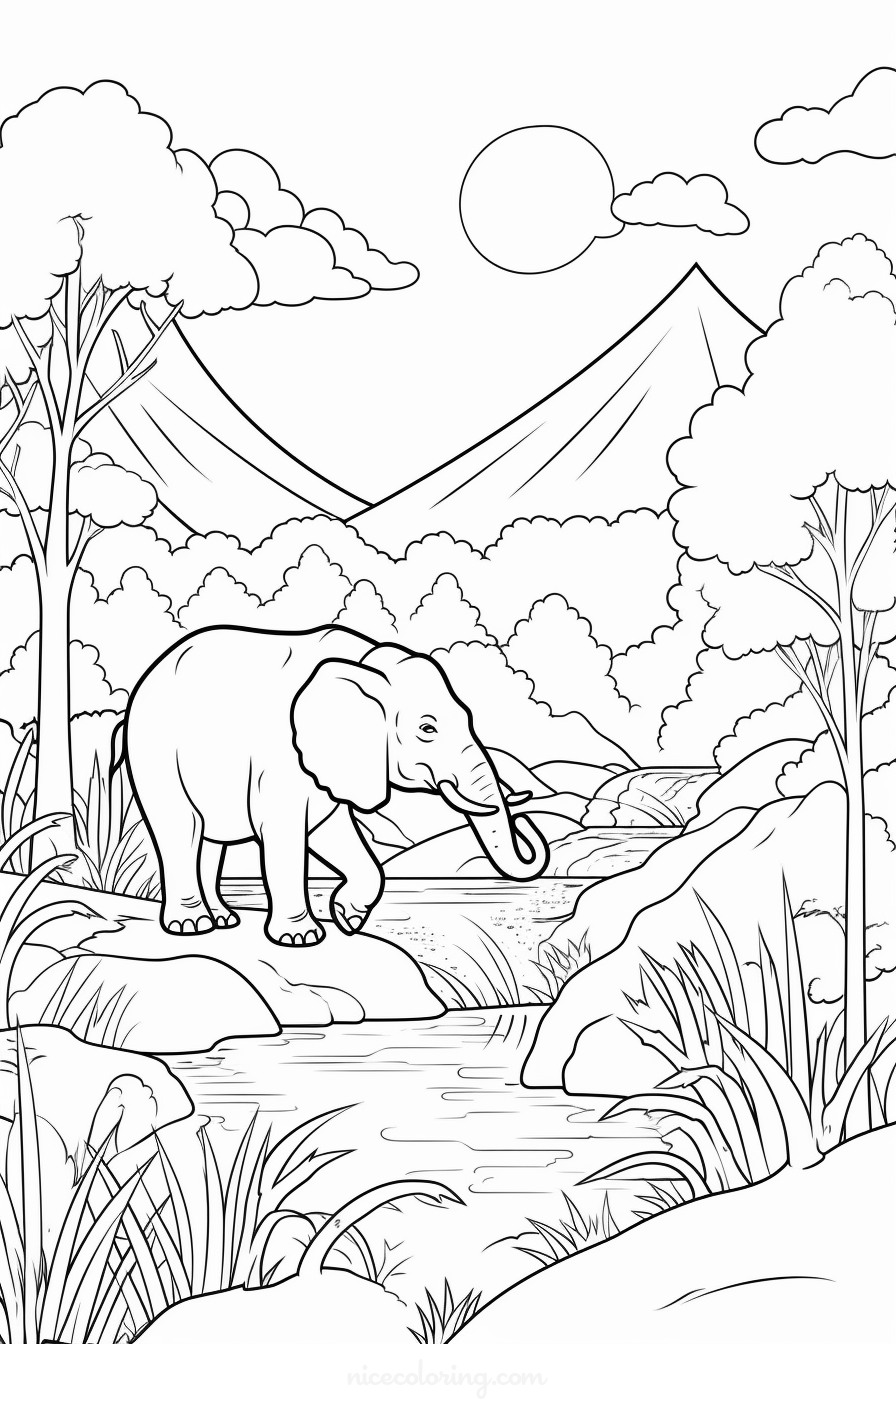 Elephant standing by a waterhole coloring